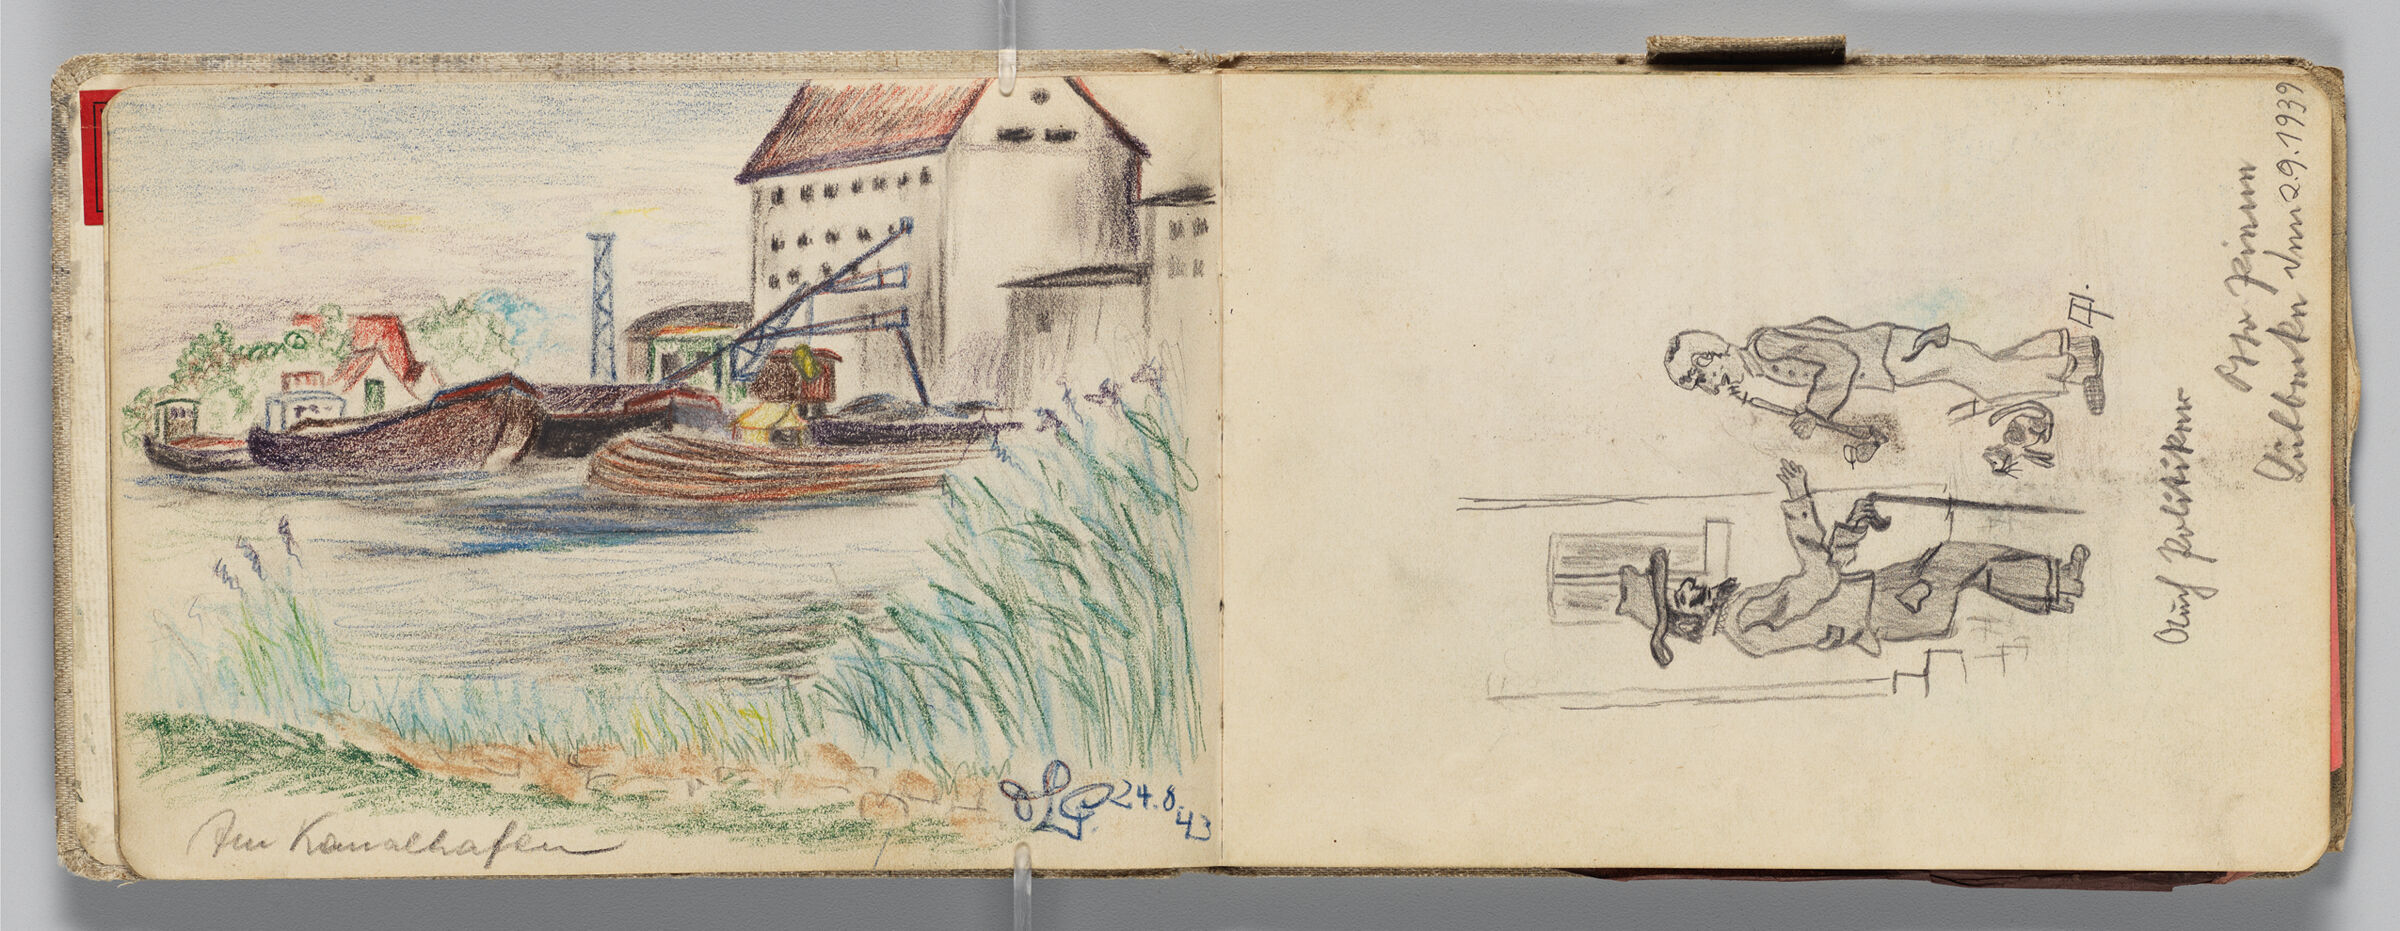 Untitled (Sketch Of Port Along Canal, Left Page); Untitled (Sketch Of Two Men Meeting On The Street, Right Page)